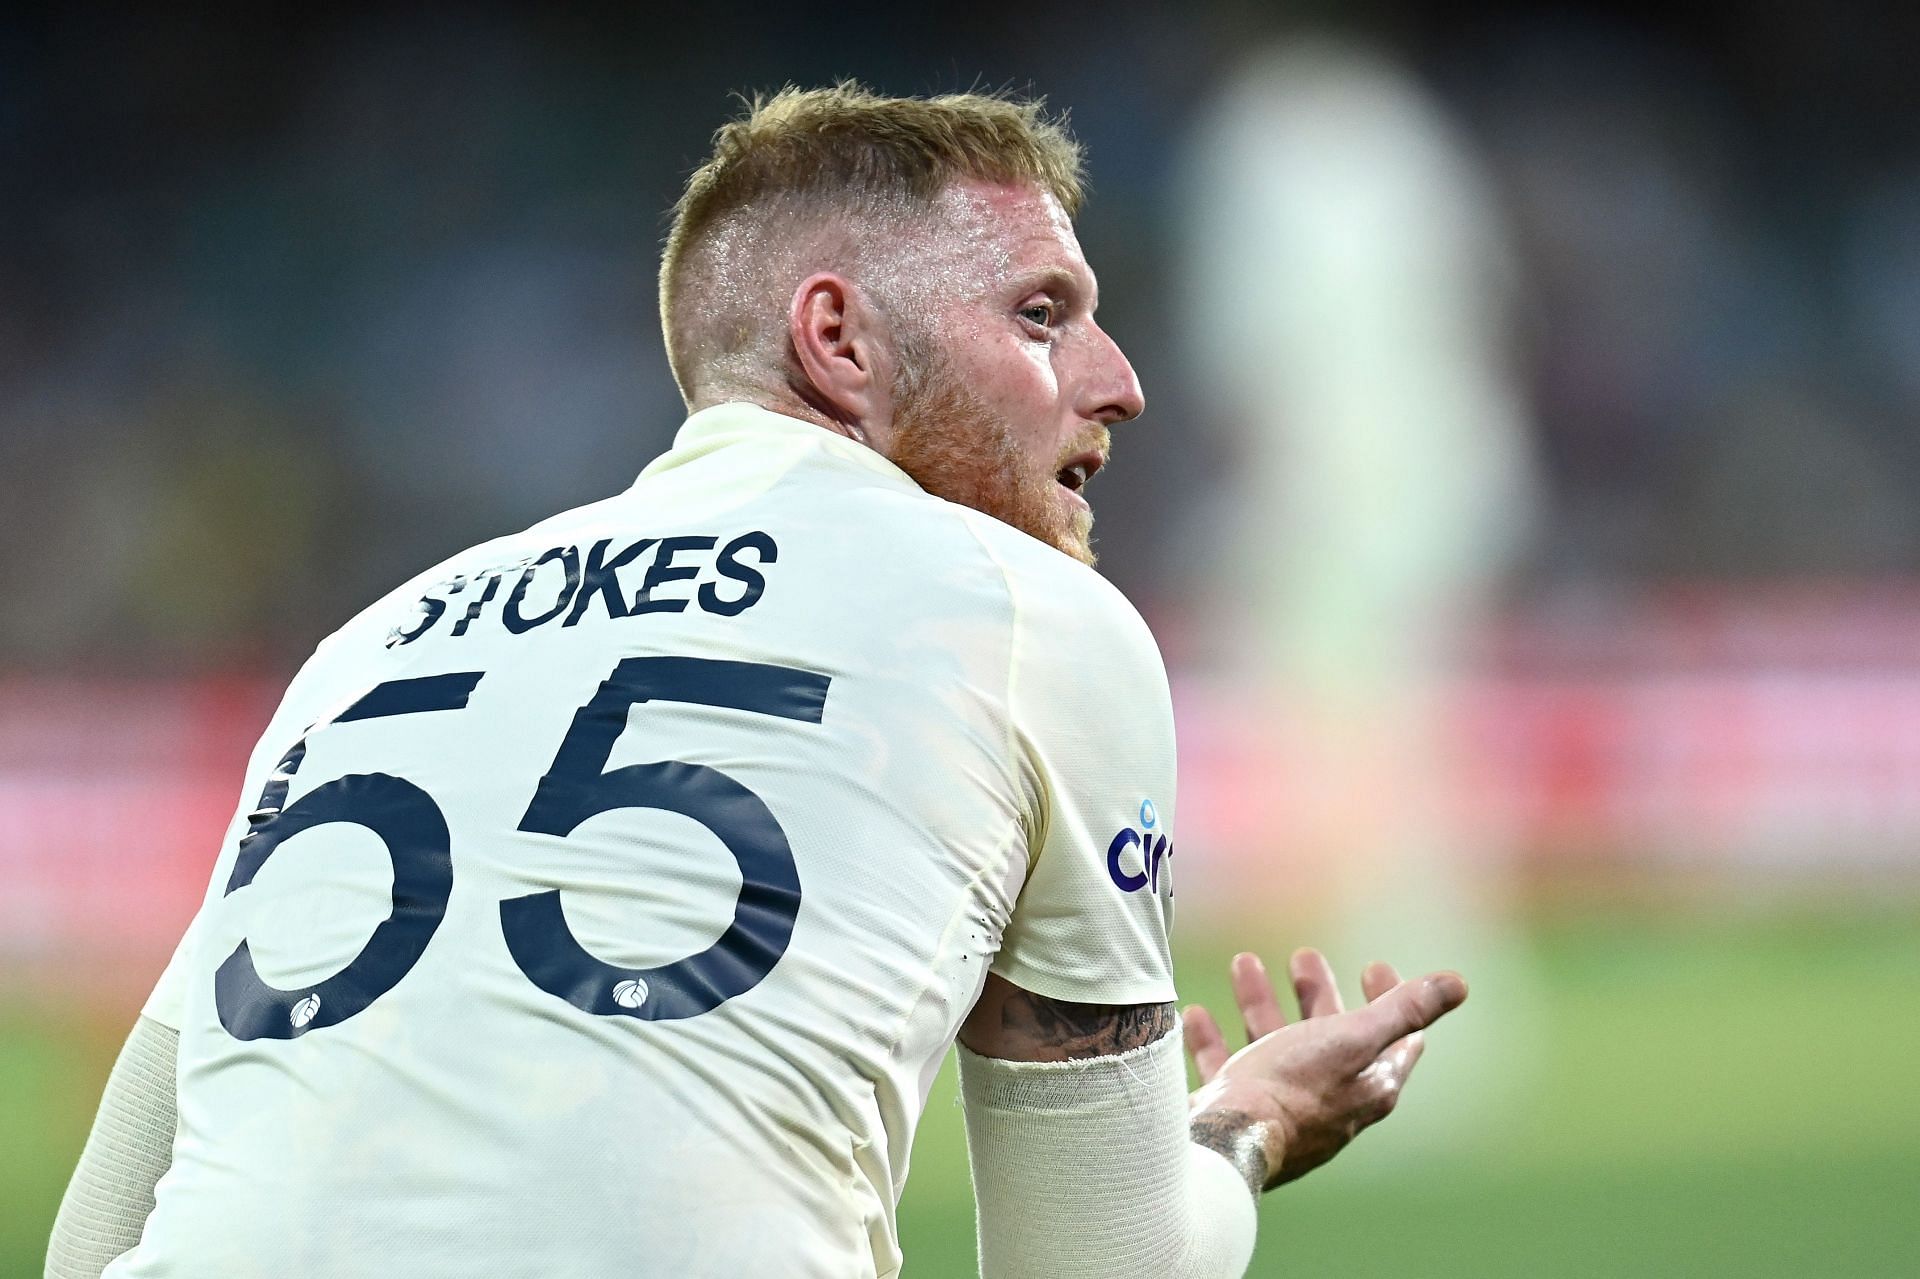 Ben Stokes is confident that tomorrow will be a good day for batting for England (Credit: Getty Images)